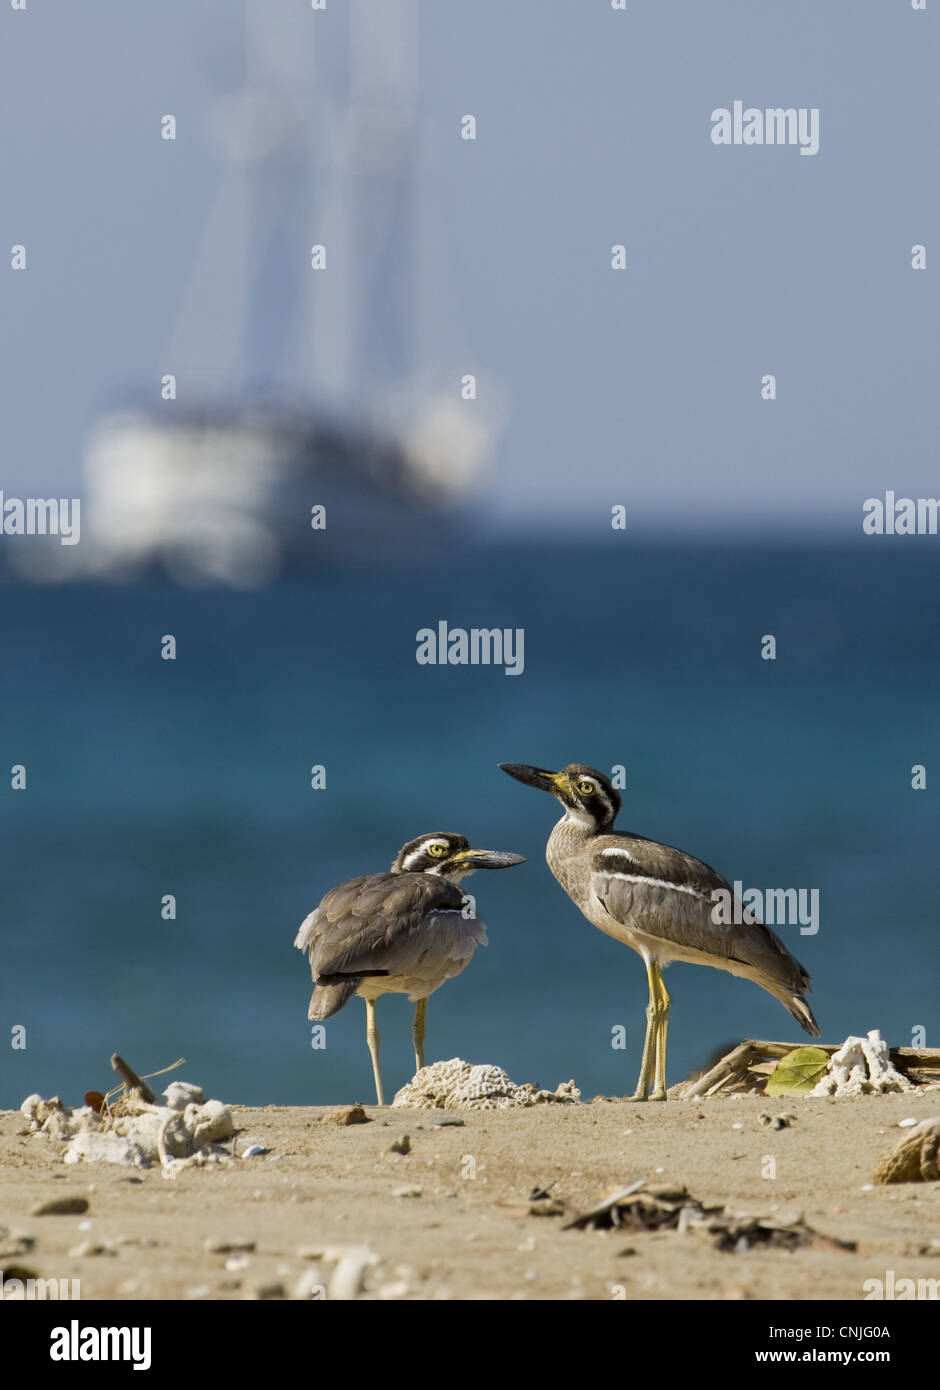 Beach Stone-curlew (Esacus giganteus) two adults, standing on beach, with ship in background, Komodo Island, Indonesia Stock Photo